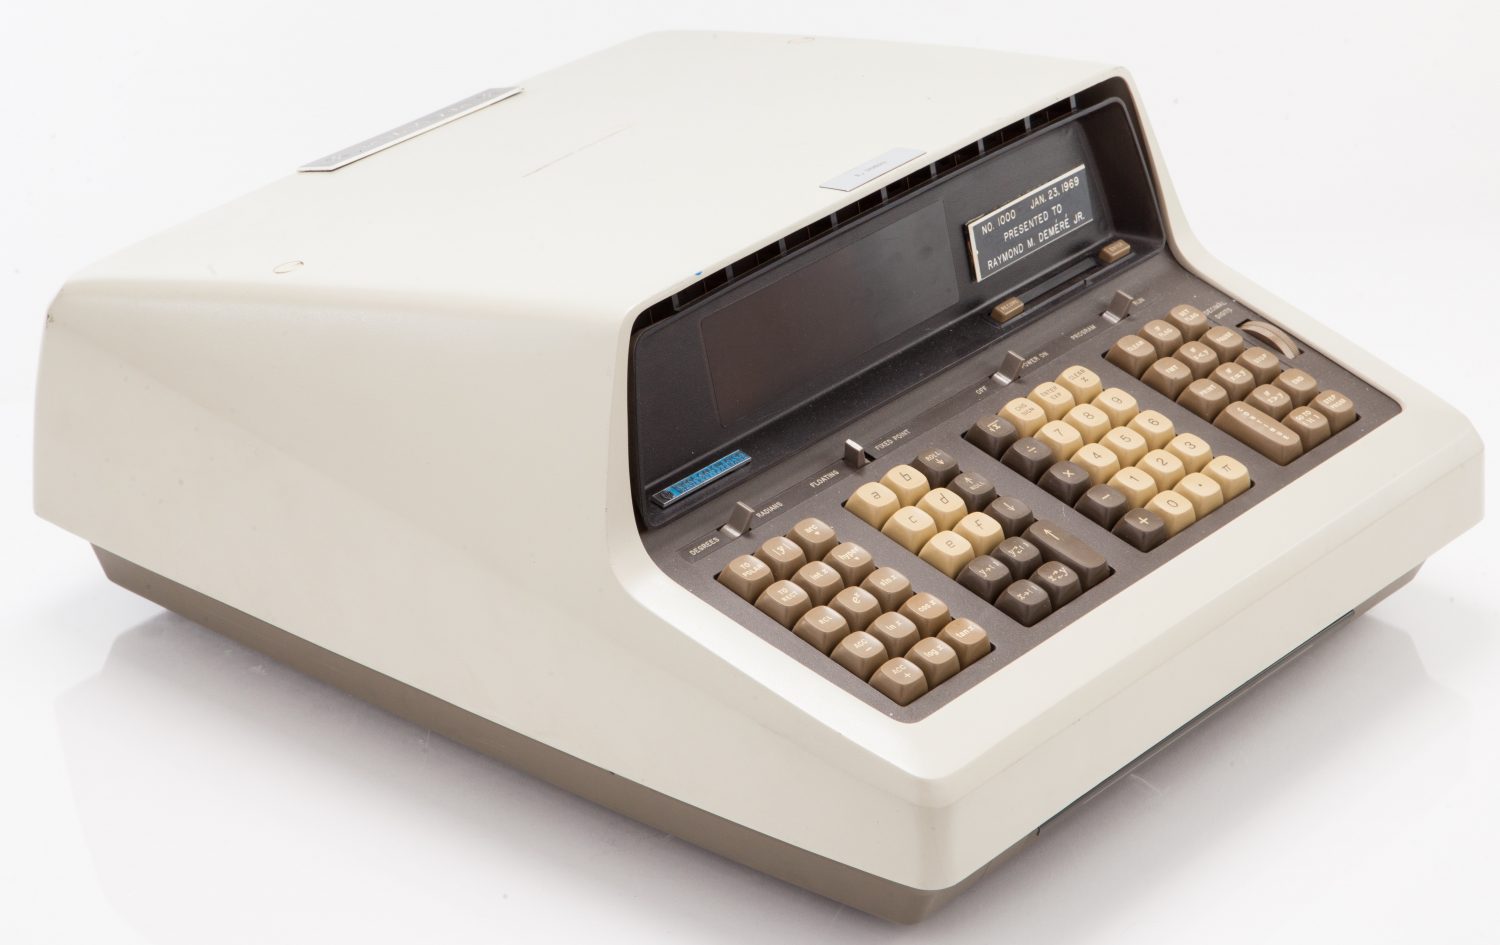 The HP 9100A programmable desktop calculator (left/front view).